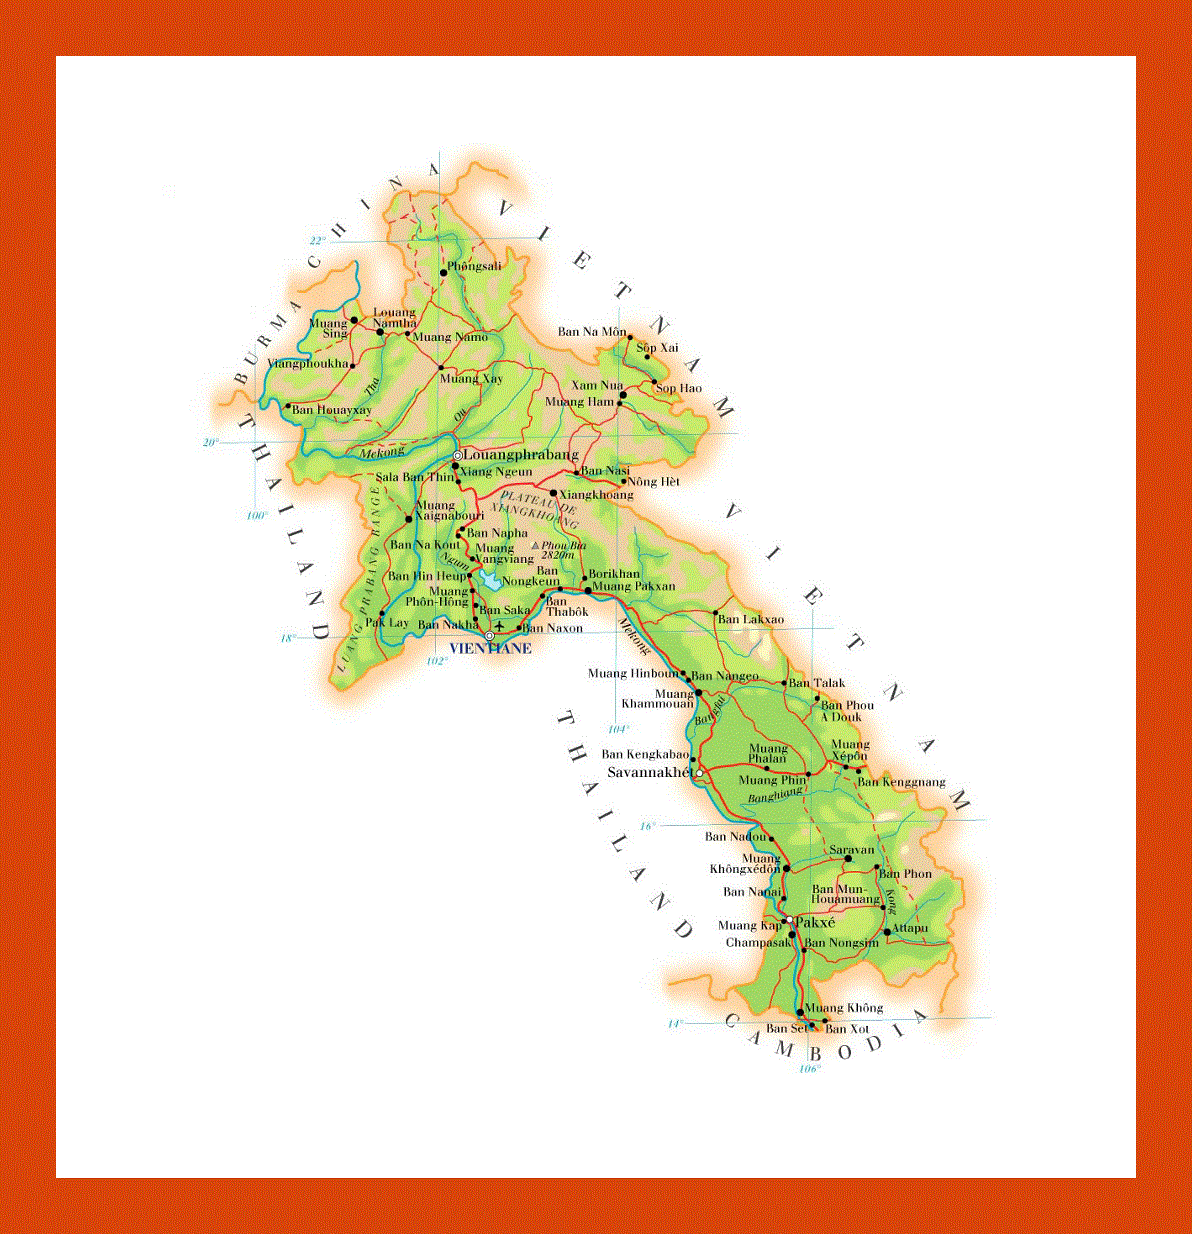 Elevation map of Laos